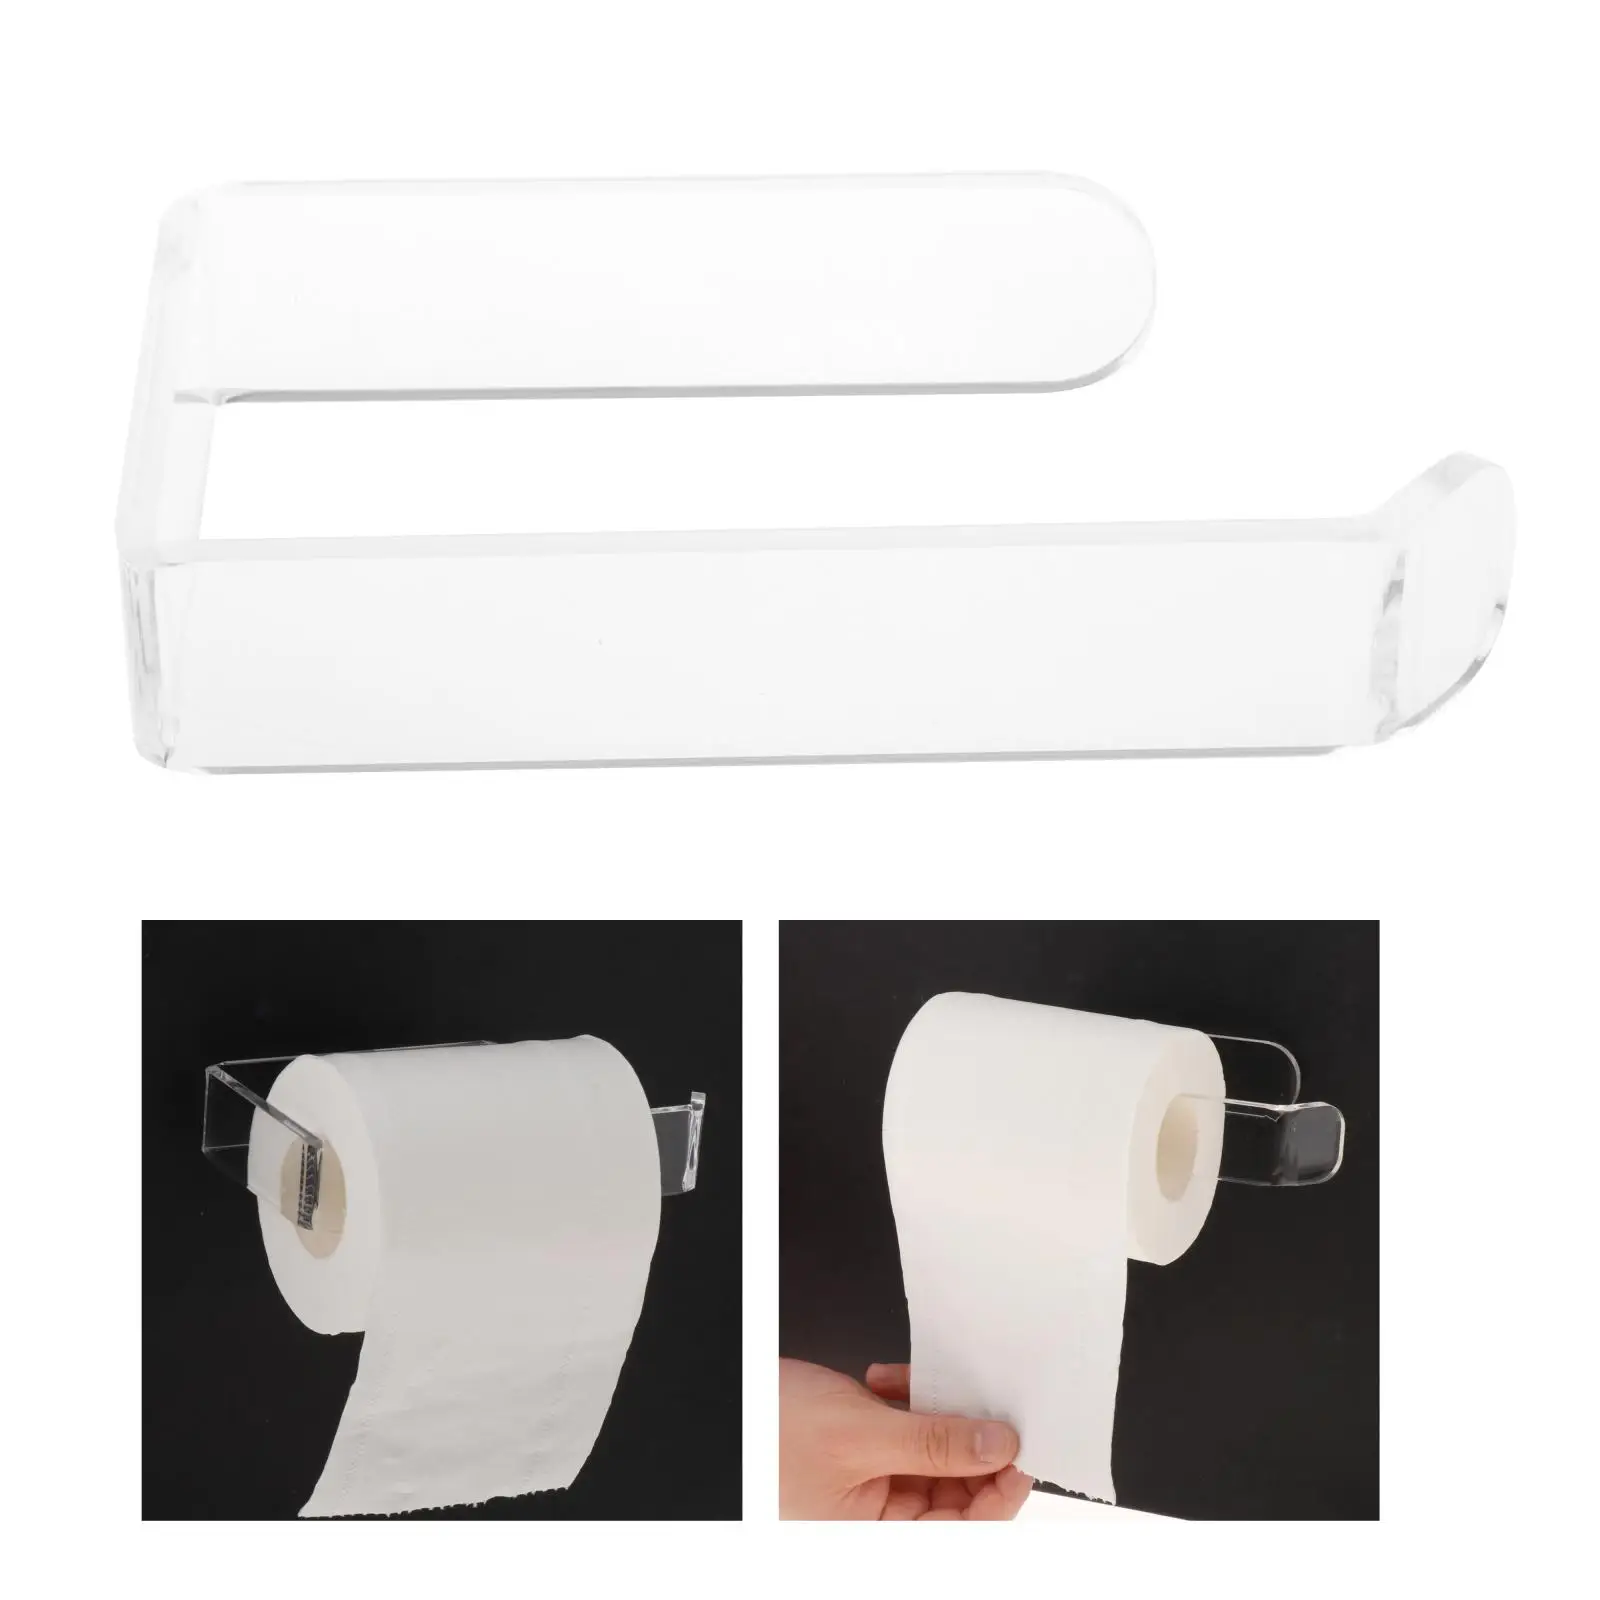 Punch-free Acrylic Toilet Roll Holder Kitchen Paper Holder for Bathroom Toilet Paper Holder Hanger Stick on Wall Tile